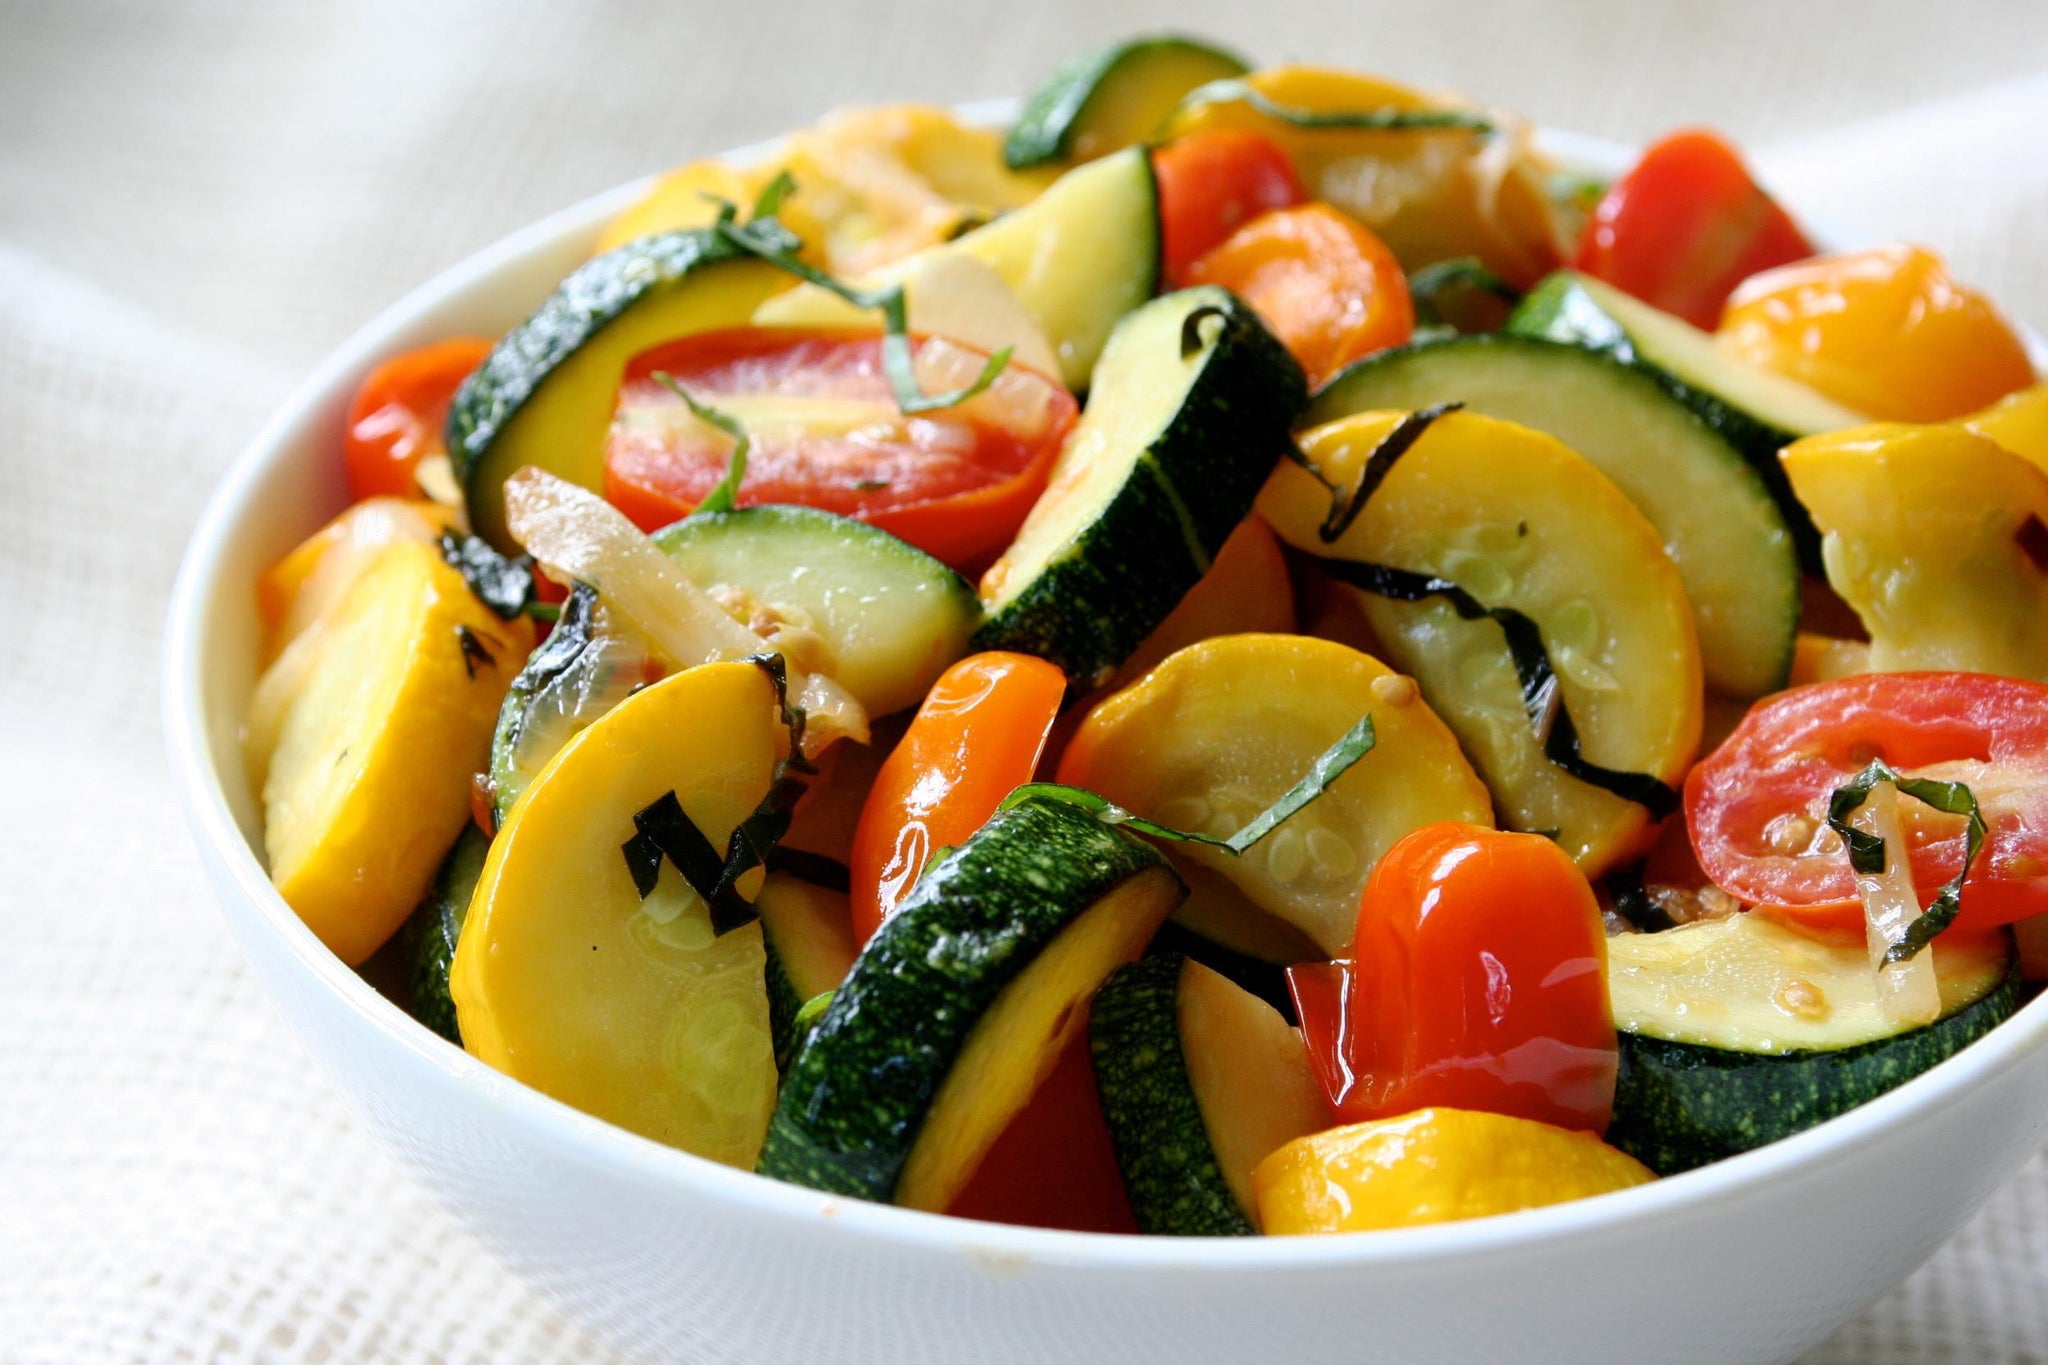 Sautéed Summer Squash with Wilted Cherry Tomatoes